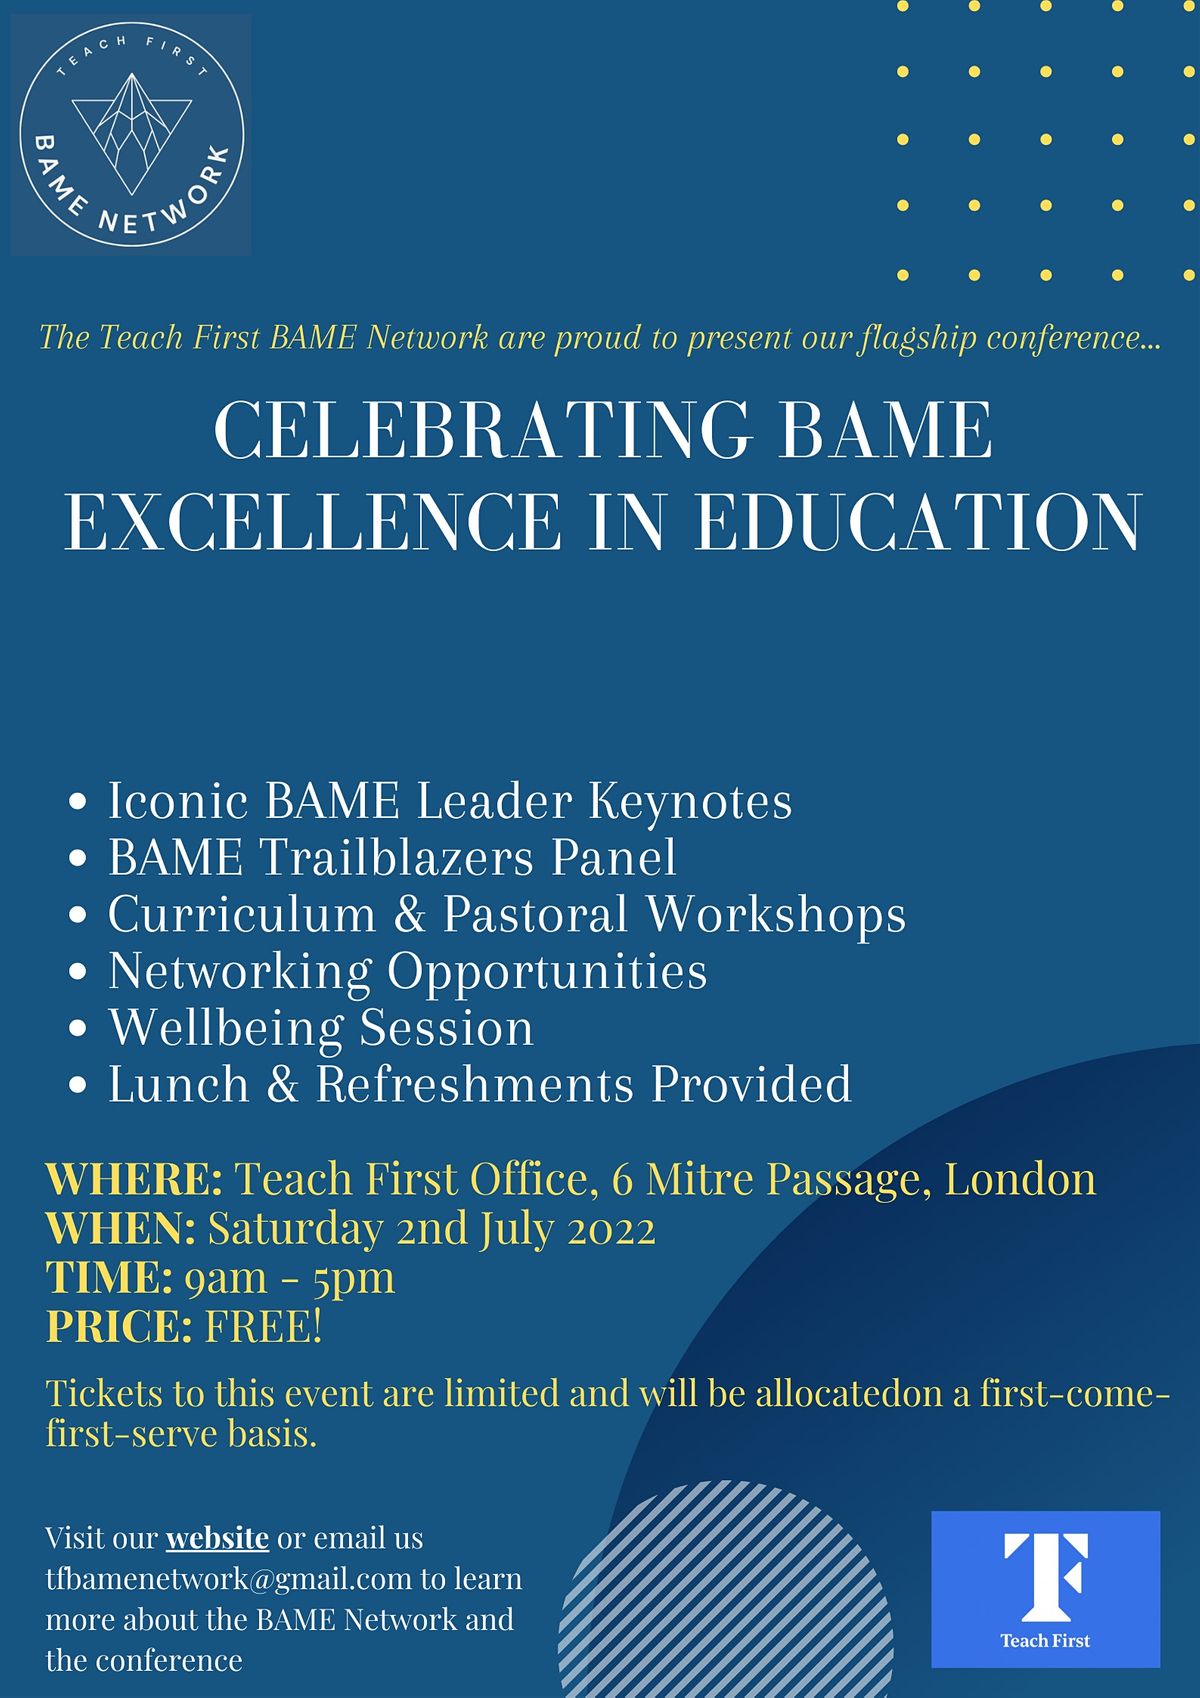 CELEBRATING BAME EXCELLENCE IN EDUCATION